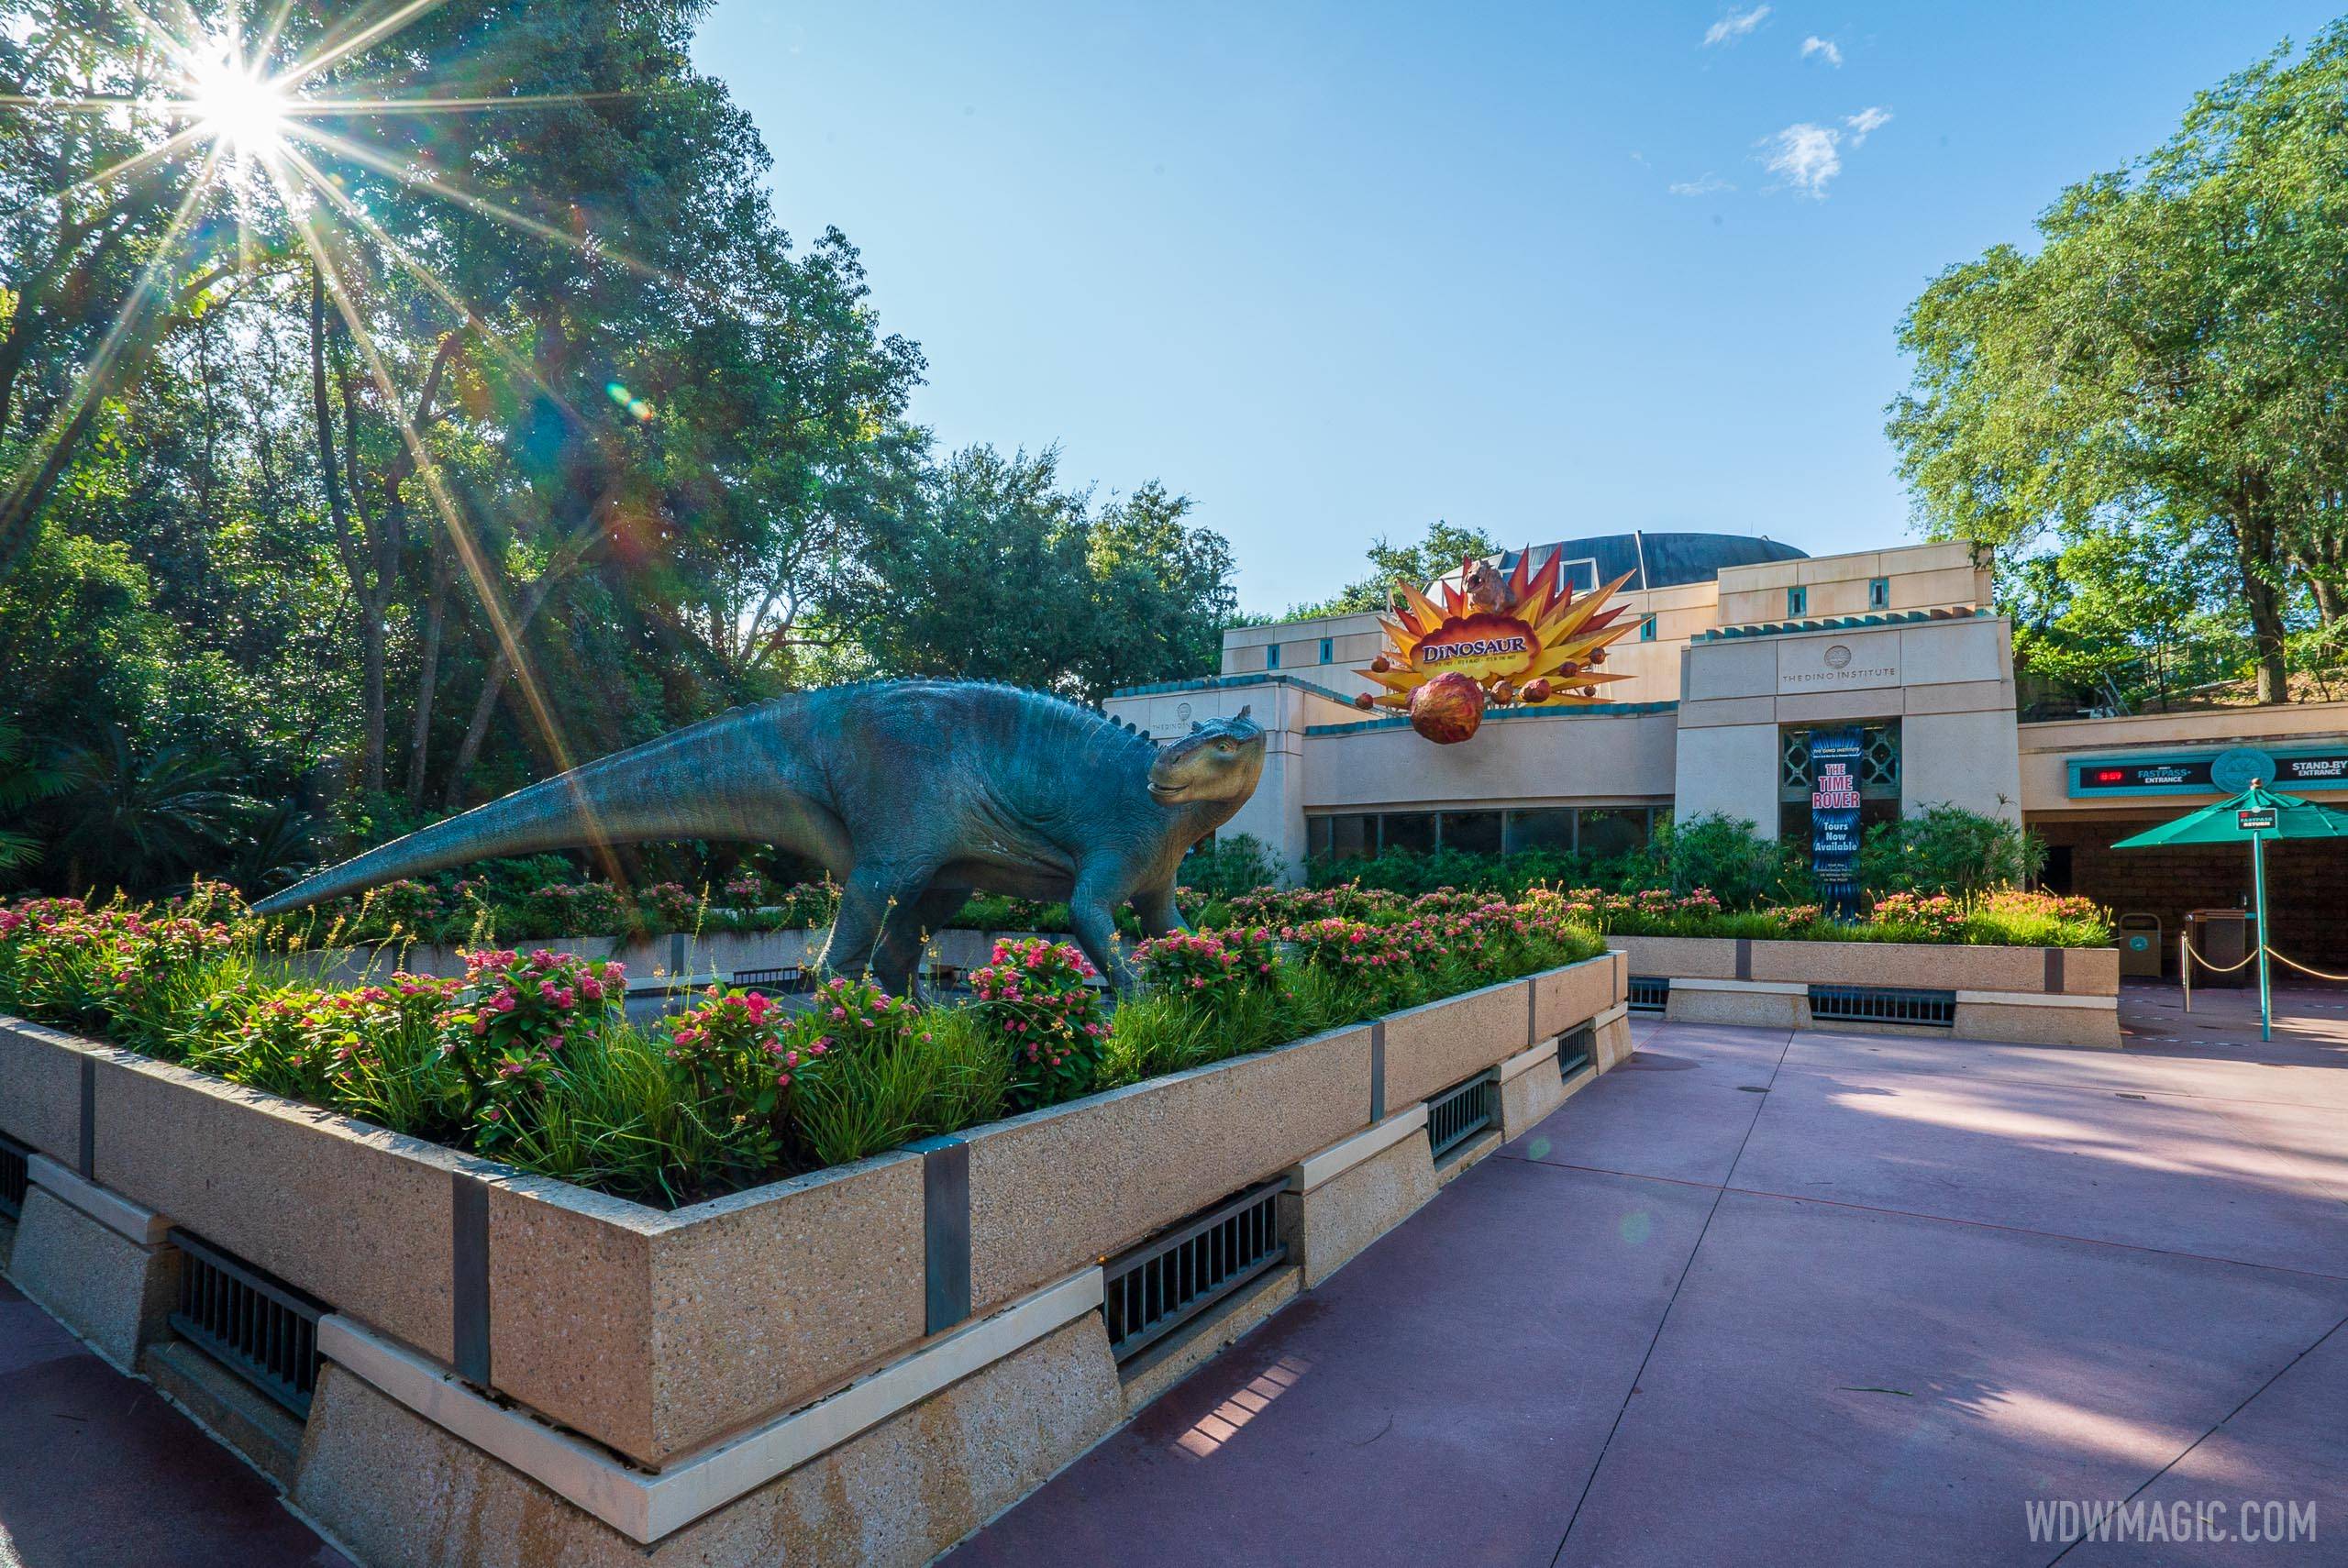 Dinosaur to operate at reduced capacity for a couple of months due to refurbishment